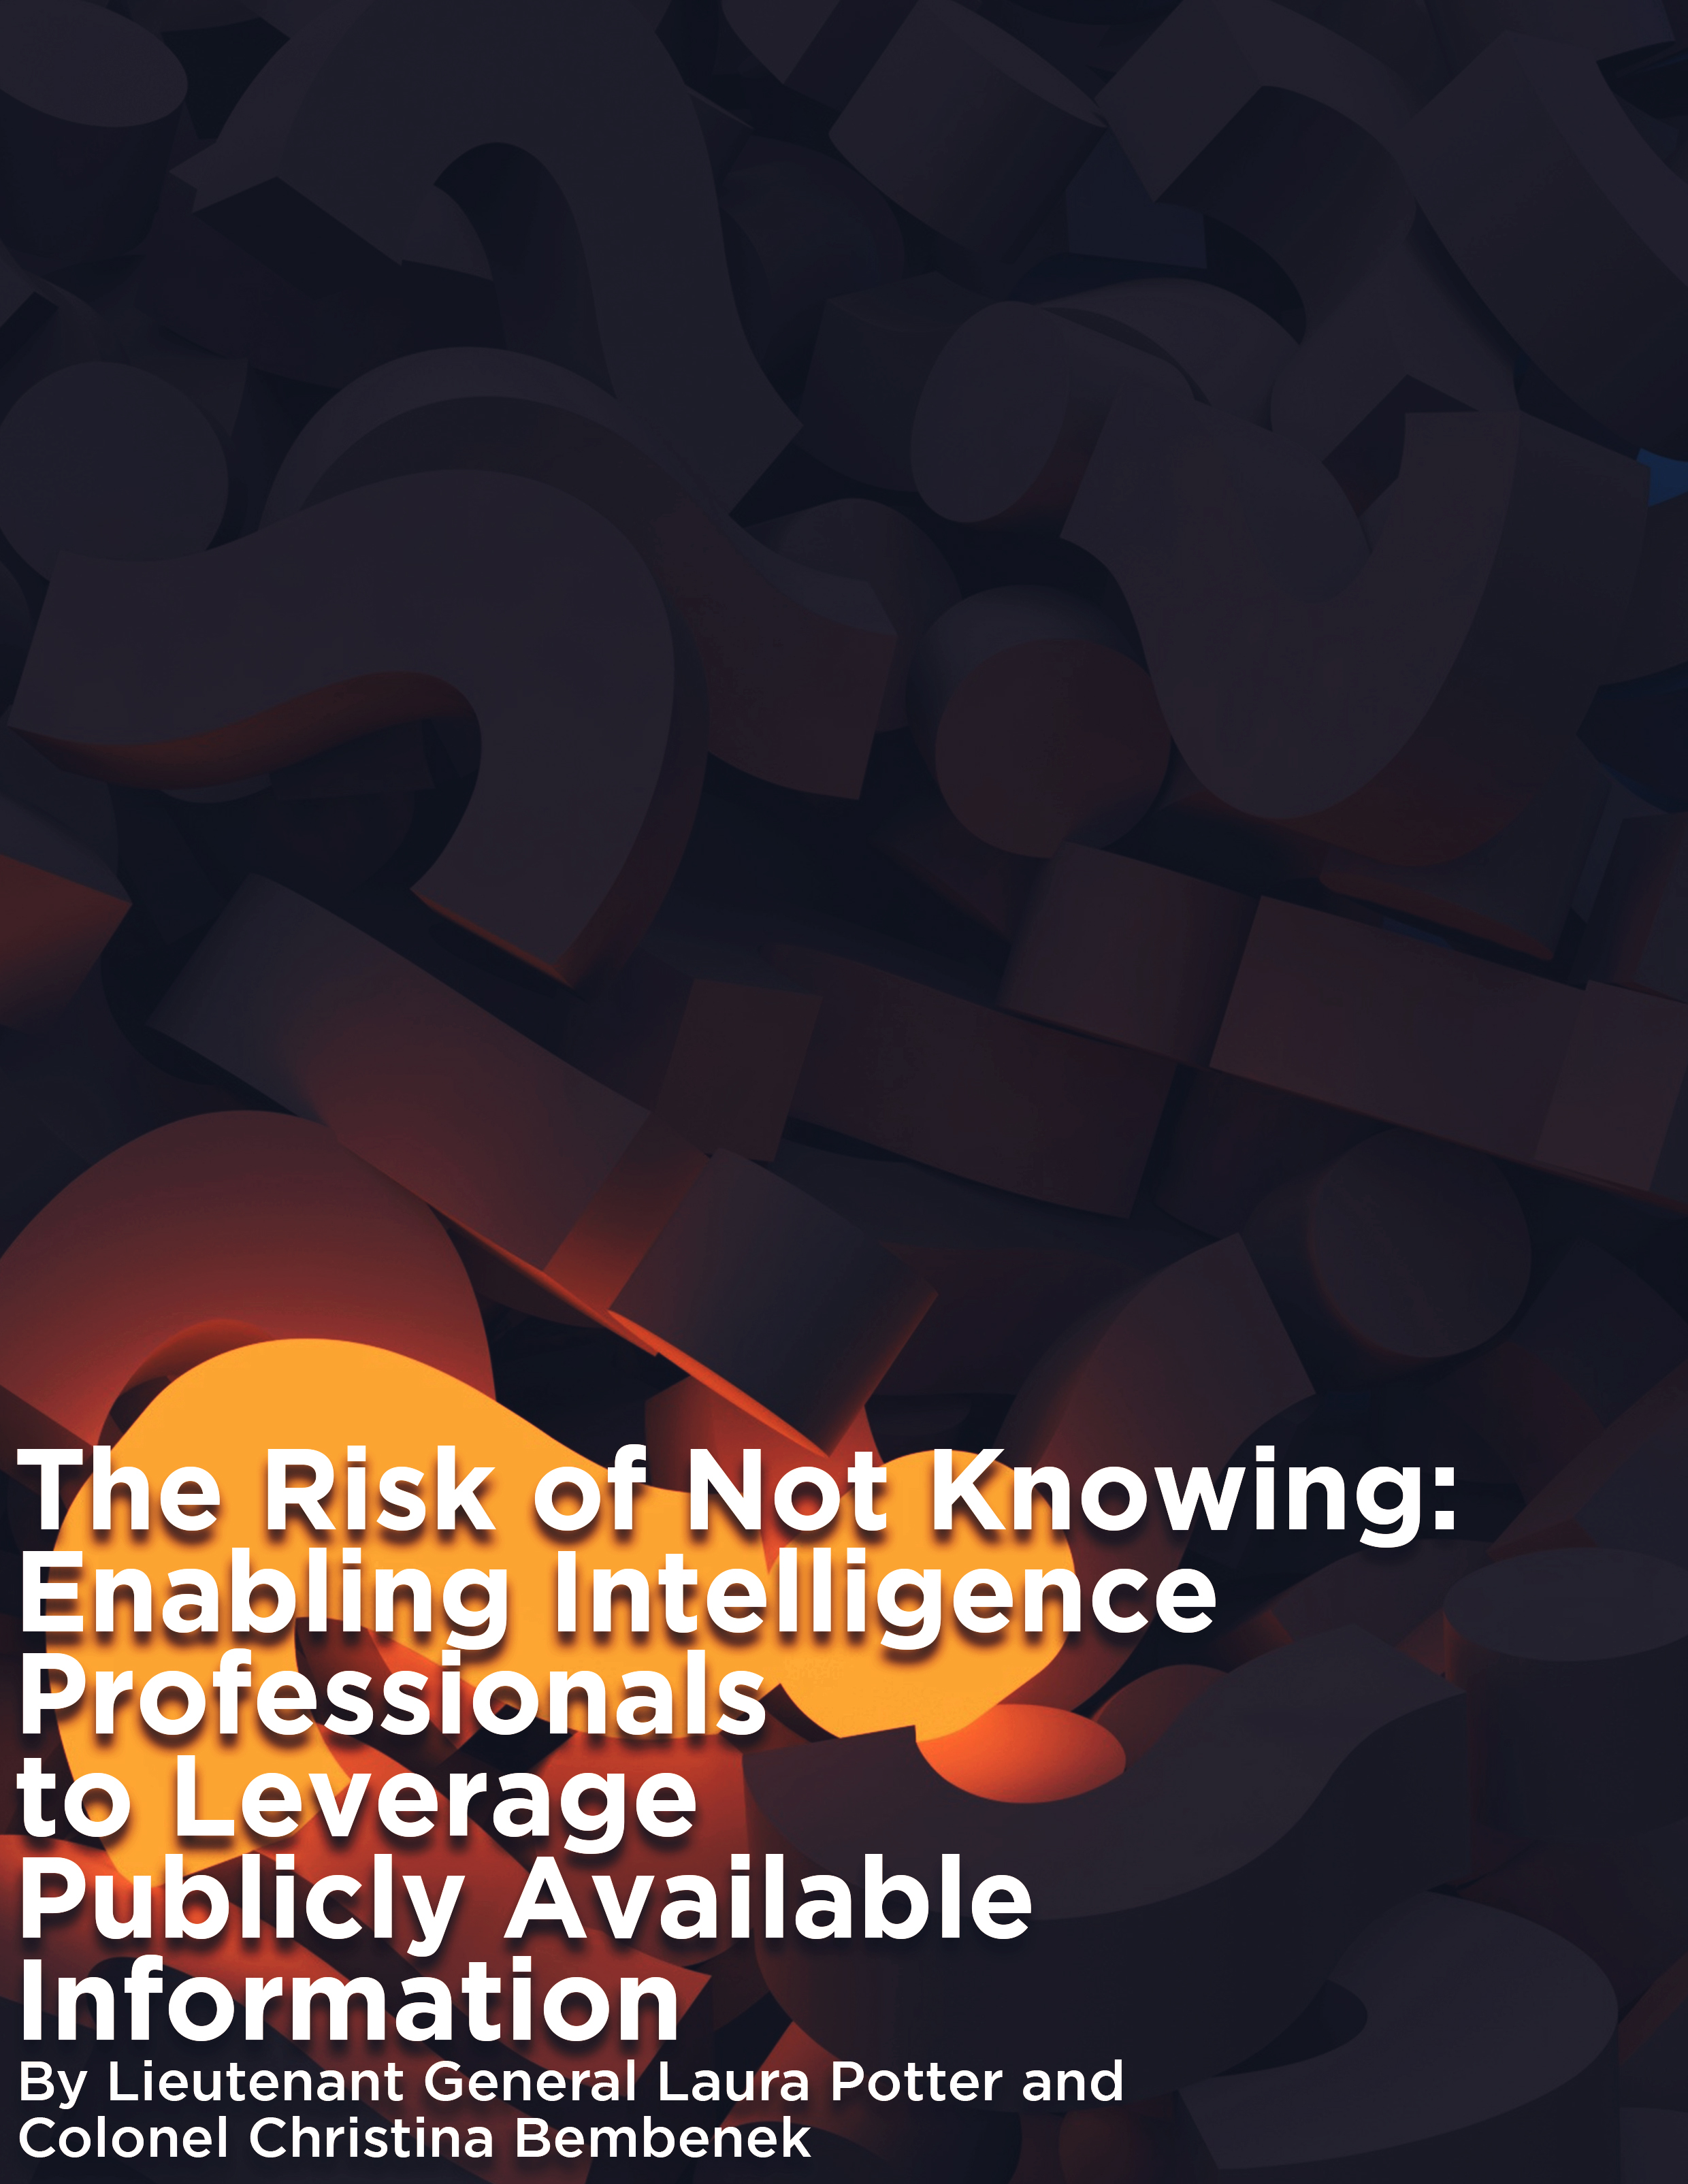 The Risk of Not Knowing: Enabling Intelligence Professionals to Leverage Publicly Available Information — 03 Apr 2022